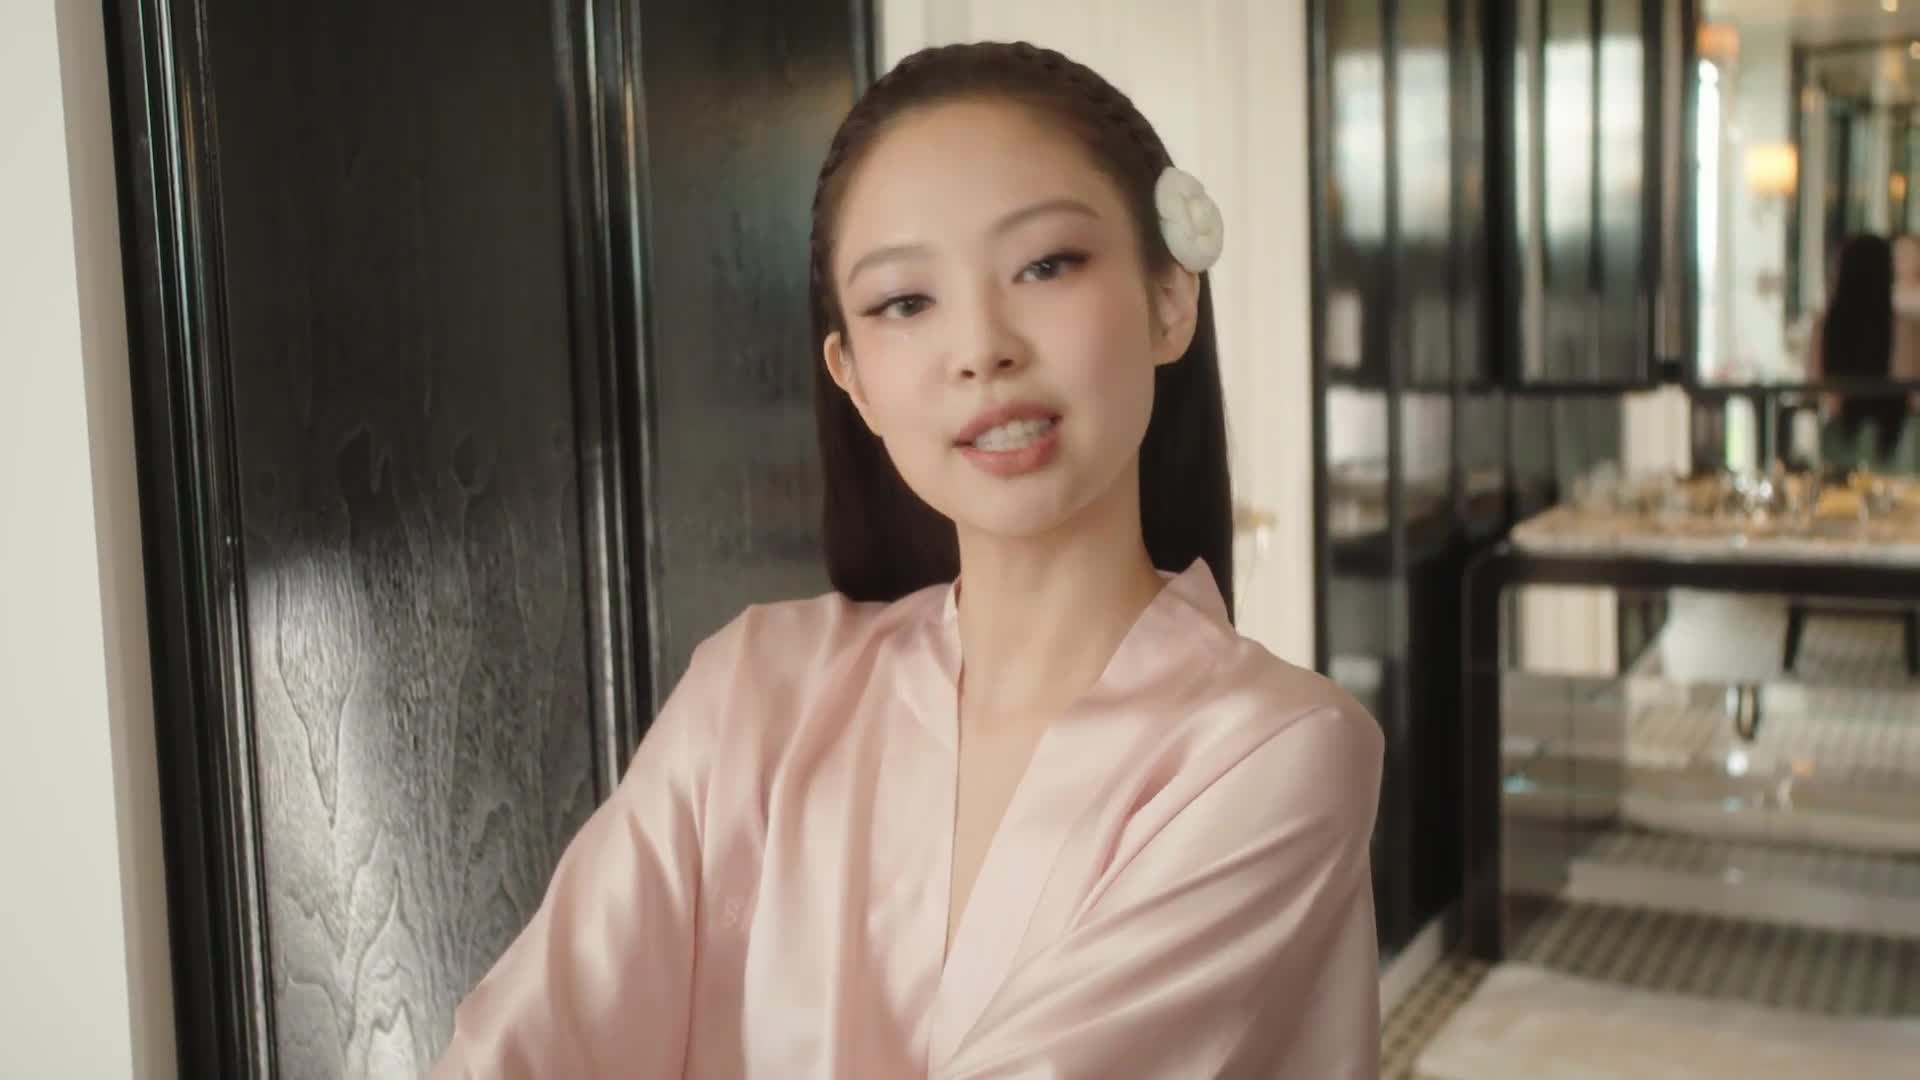 Watch Blackpink's Jennie Kim Makes Her Met Gala Debut in Vintage 1990 Chanel, Getting Ready with Vogue